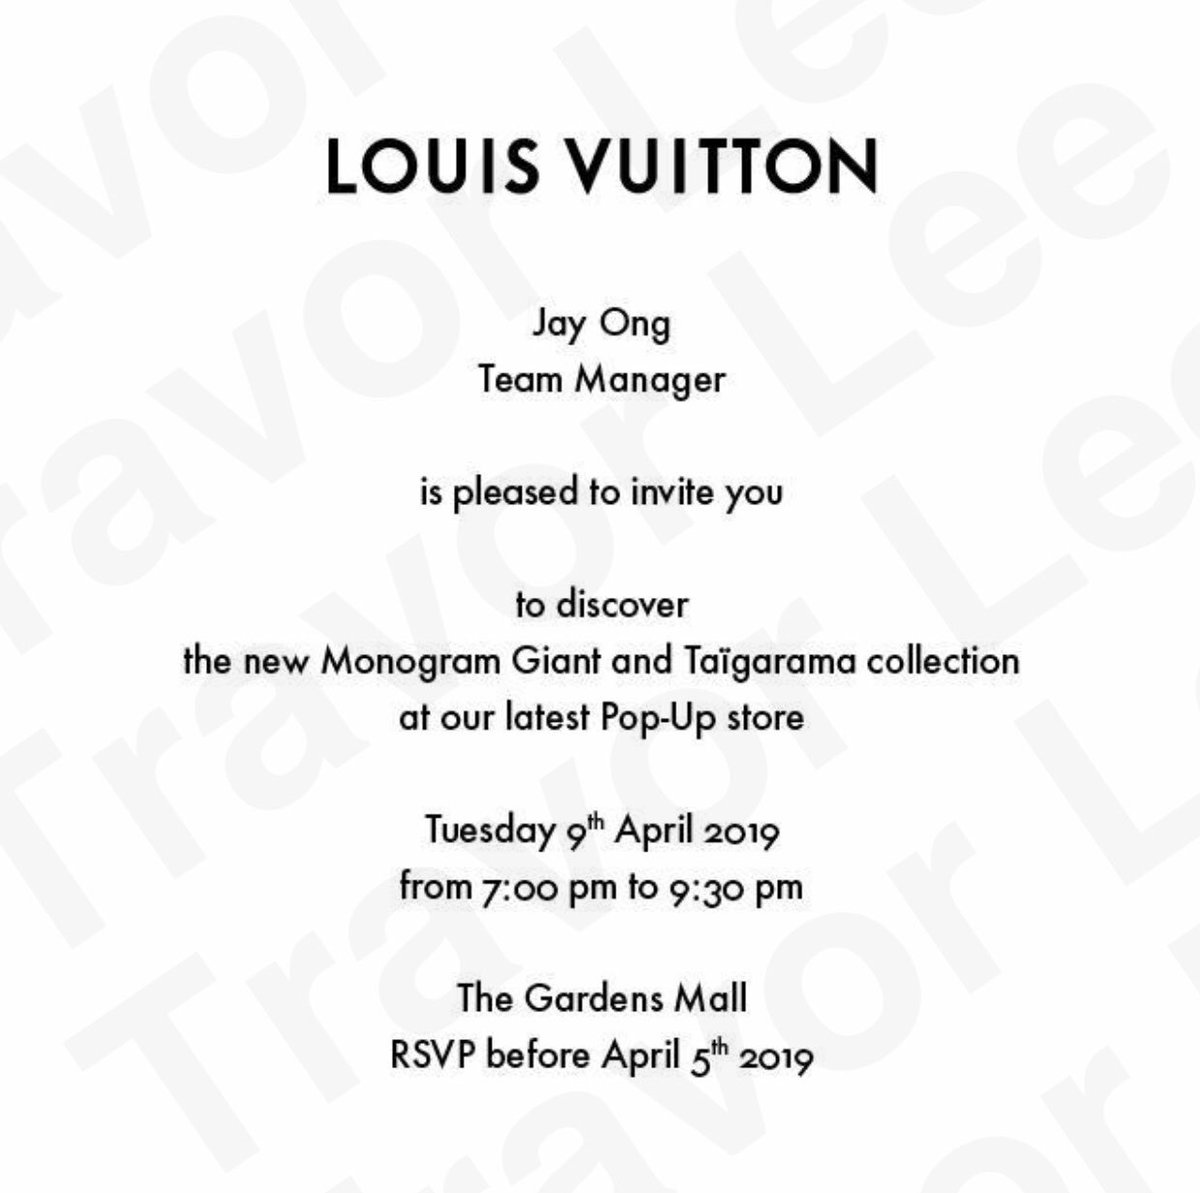 Travor Lee on Twitter: "Thanks Louis Vuitton Malaysia for the invite. Excited for the private launching event ! 😝 https://t.co/GNQmZQ53T3" /